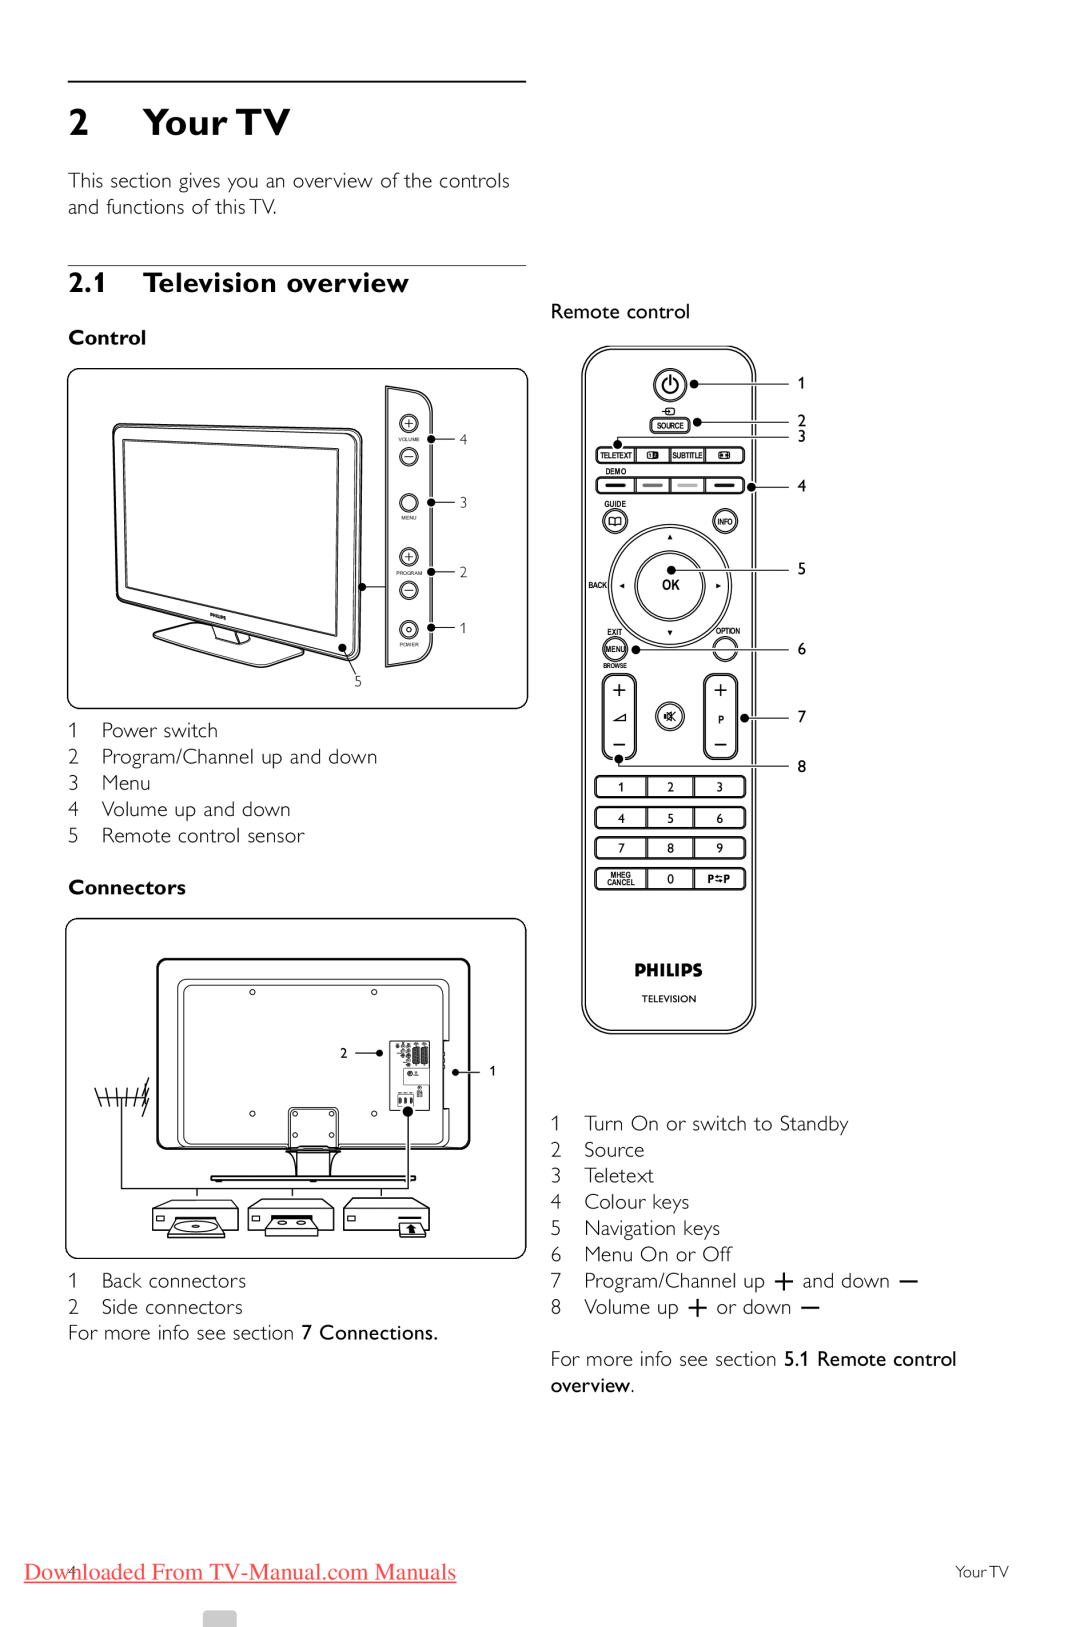 Philips 42PFL5603, 42PFL5403 Your TV, 2.1Television overview, Control, Connectors, Downloaded From TV-Manual.comManuals 